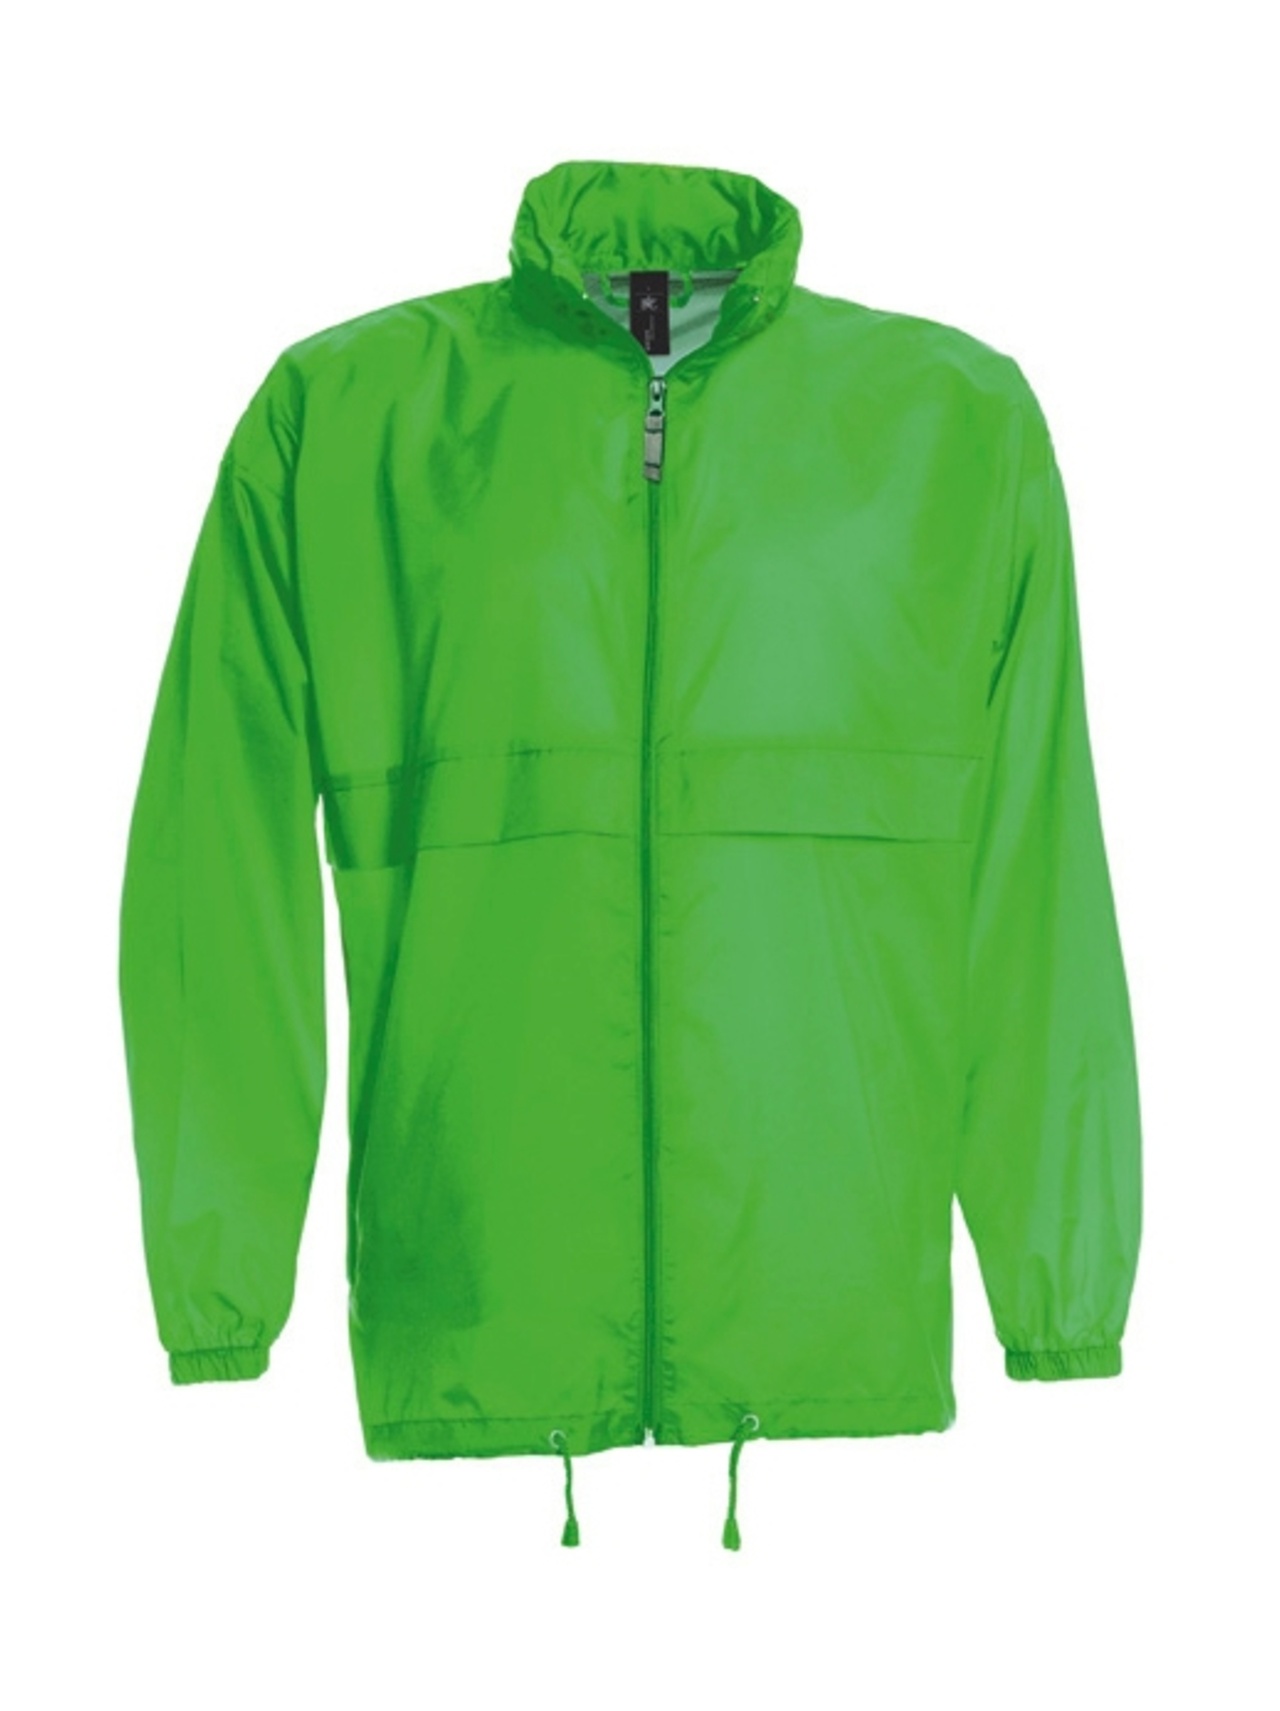 B and C Collection Sirocco - REAL GREEN - XXL